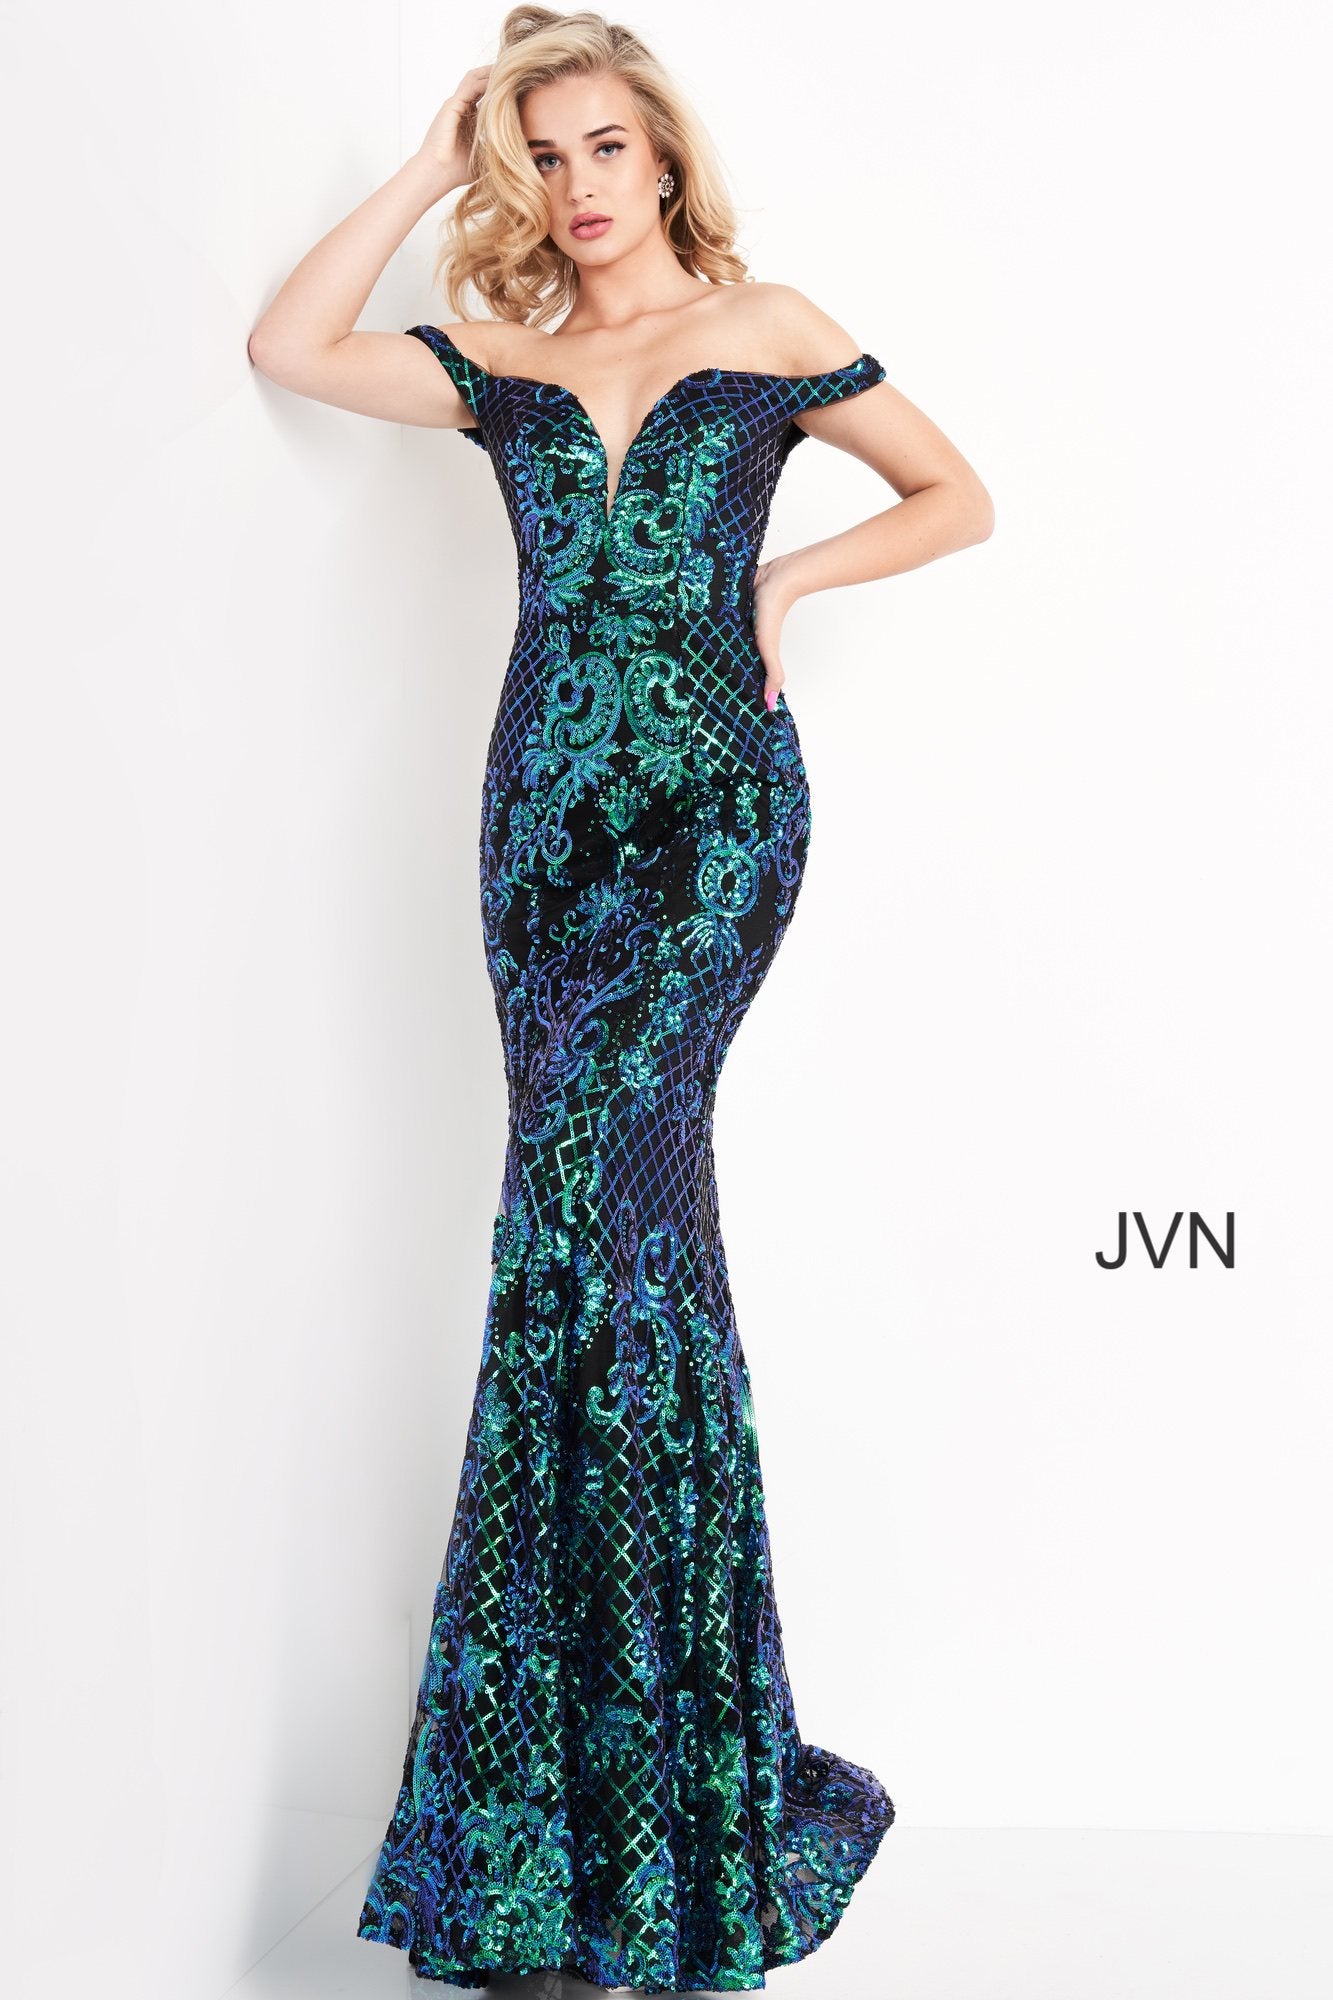 Jovani JVN04515 is an over the top 2021 Prom Formal Wear Style! This Glamorous Pageant Gown Features off the shoulder straps with a Plunging V Neckline. Fitted Mermaid Silhouette Cascades into a subtle lush trumpet skirt. Elaborate Multi Color Sequin Pattern form a damask print and add a Glamorous appeal. This gown is for those who want to be seen! Great for Plus Size! Great sexy wedding reception dress in ivory! JVN 04515  Ivory  Size 8